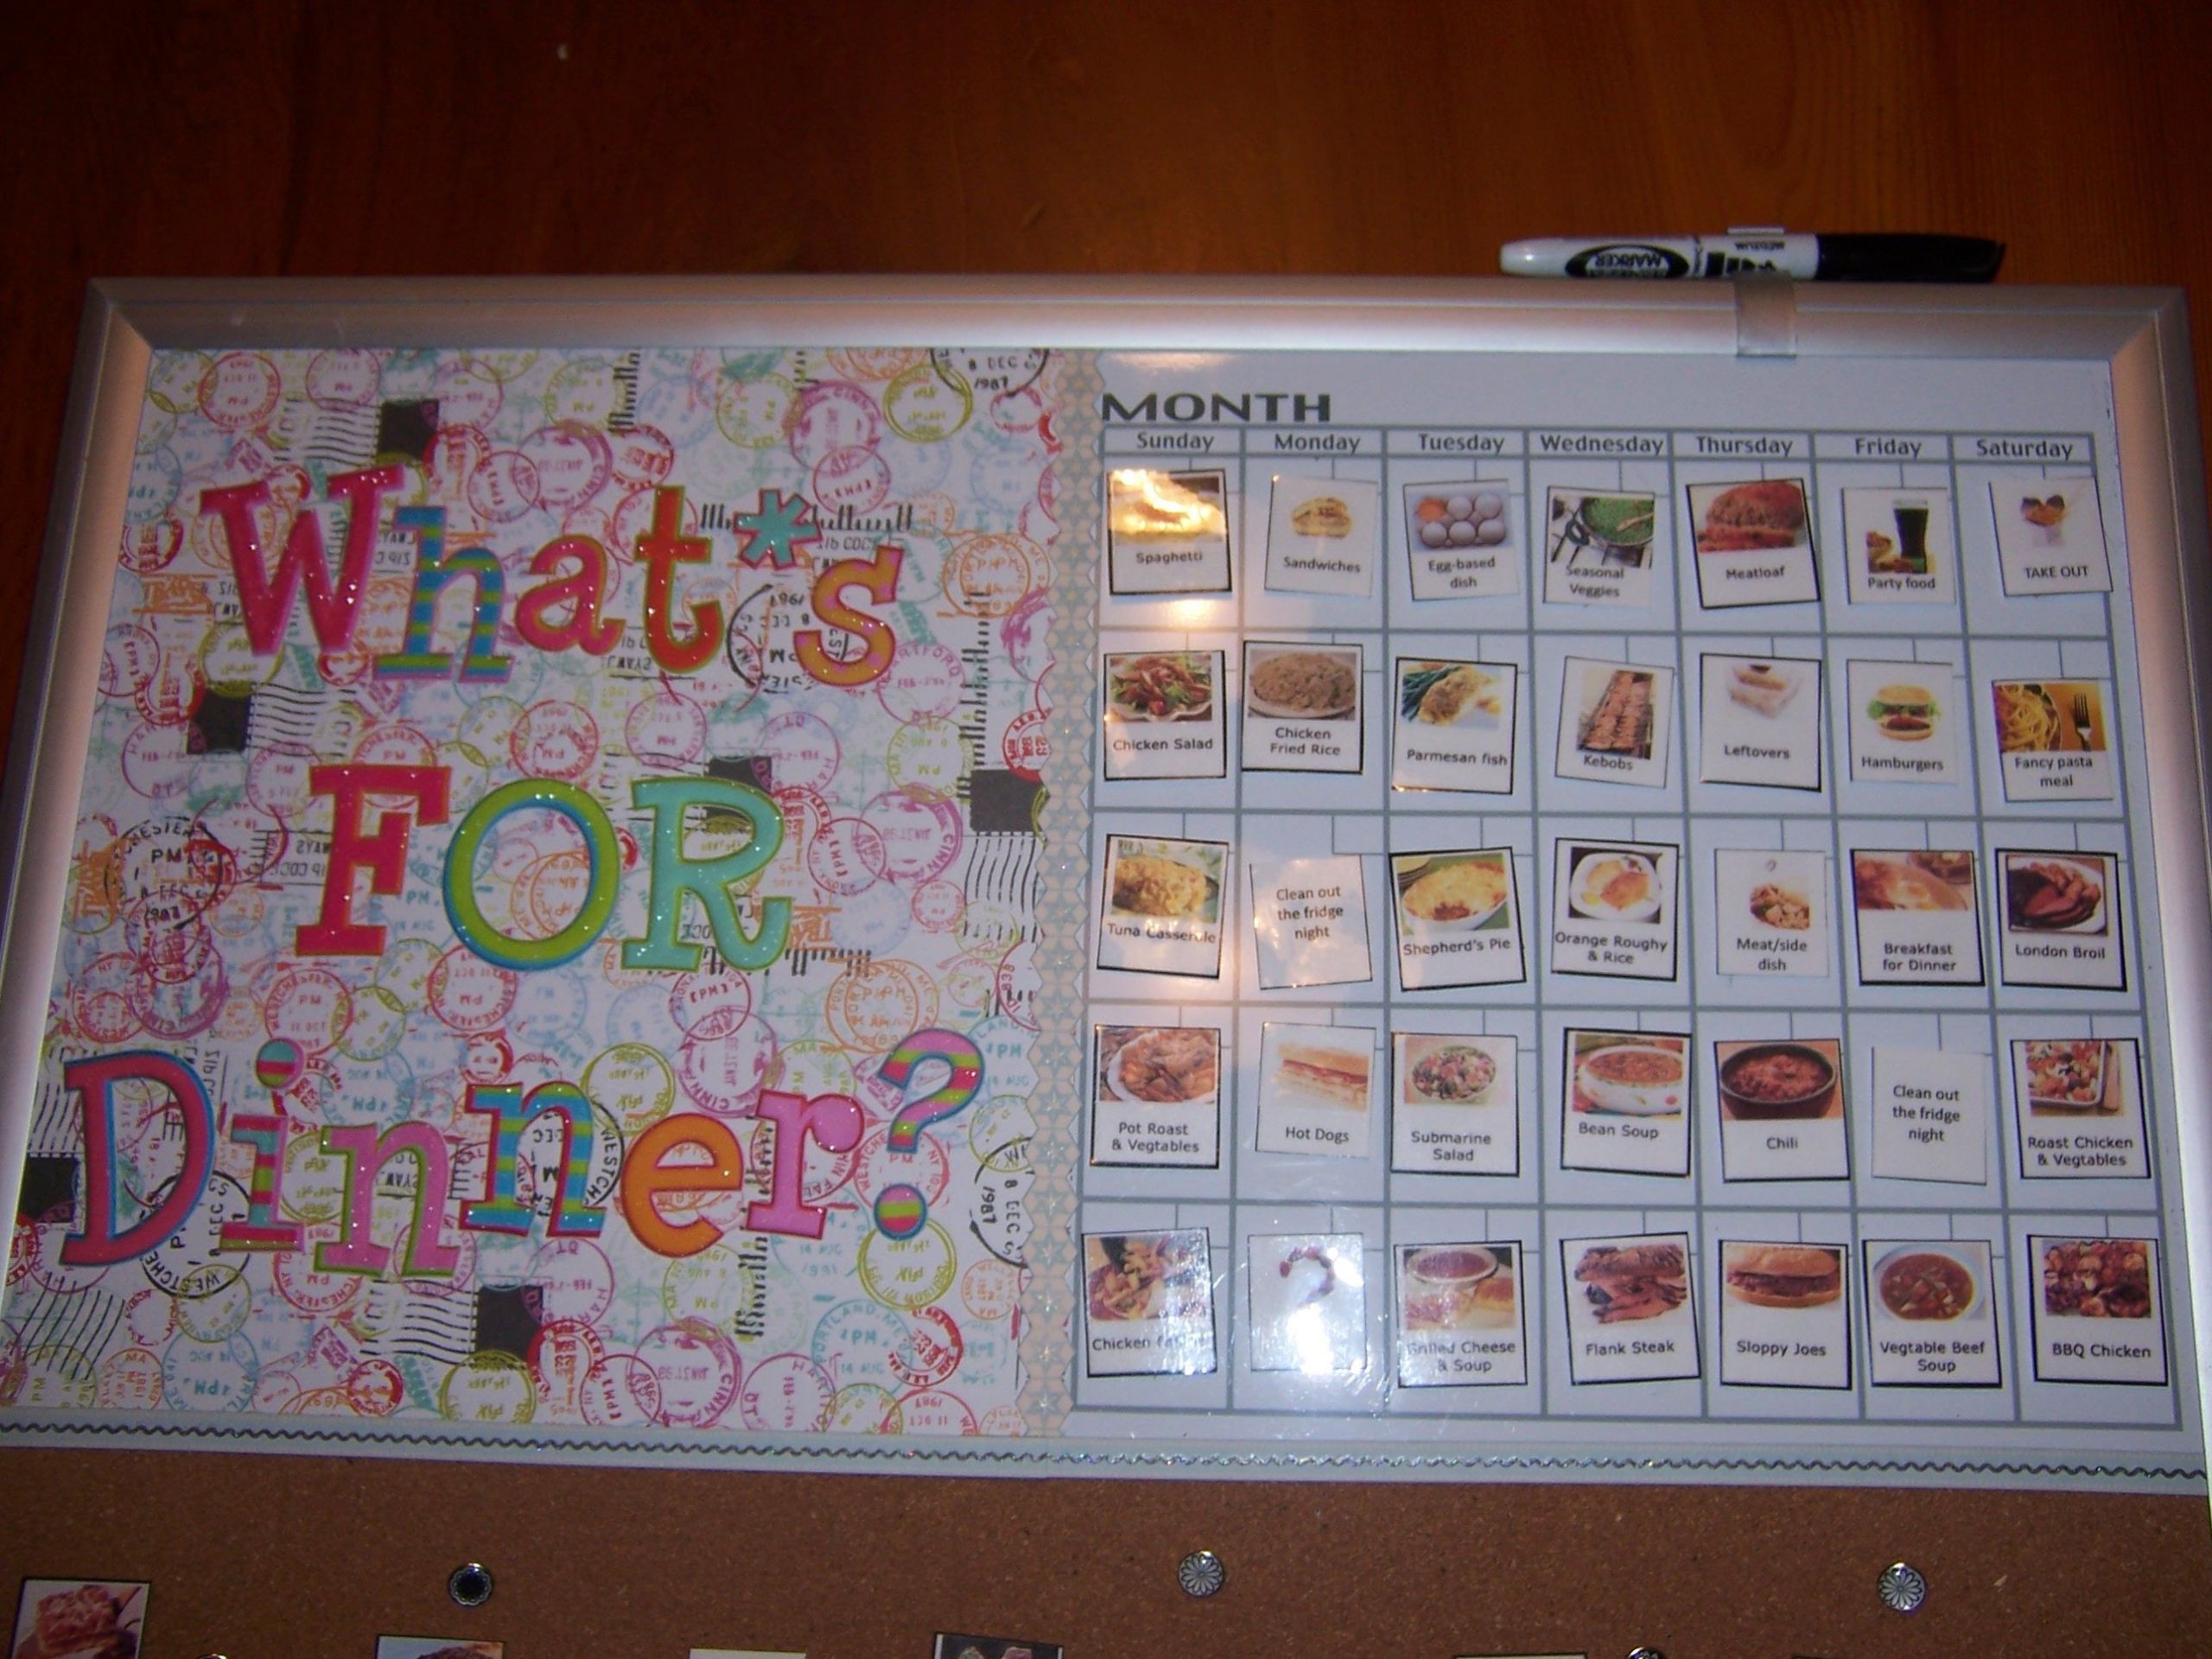 DIY Meal Planning
 DIY Meal Planning Board [Tutorial] I like how the meal